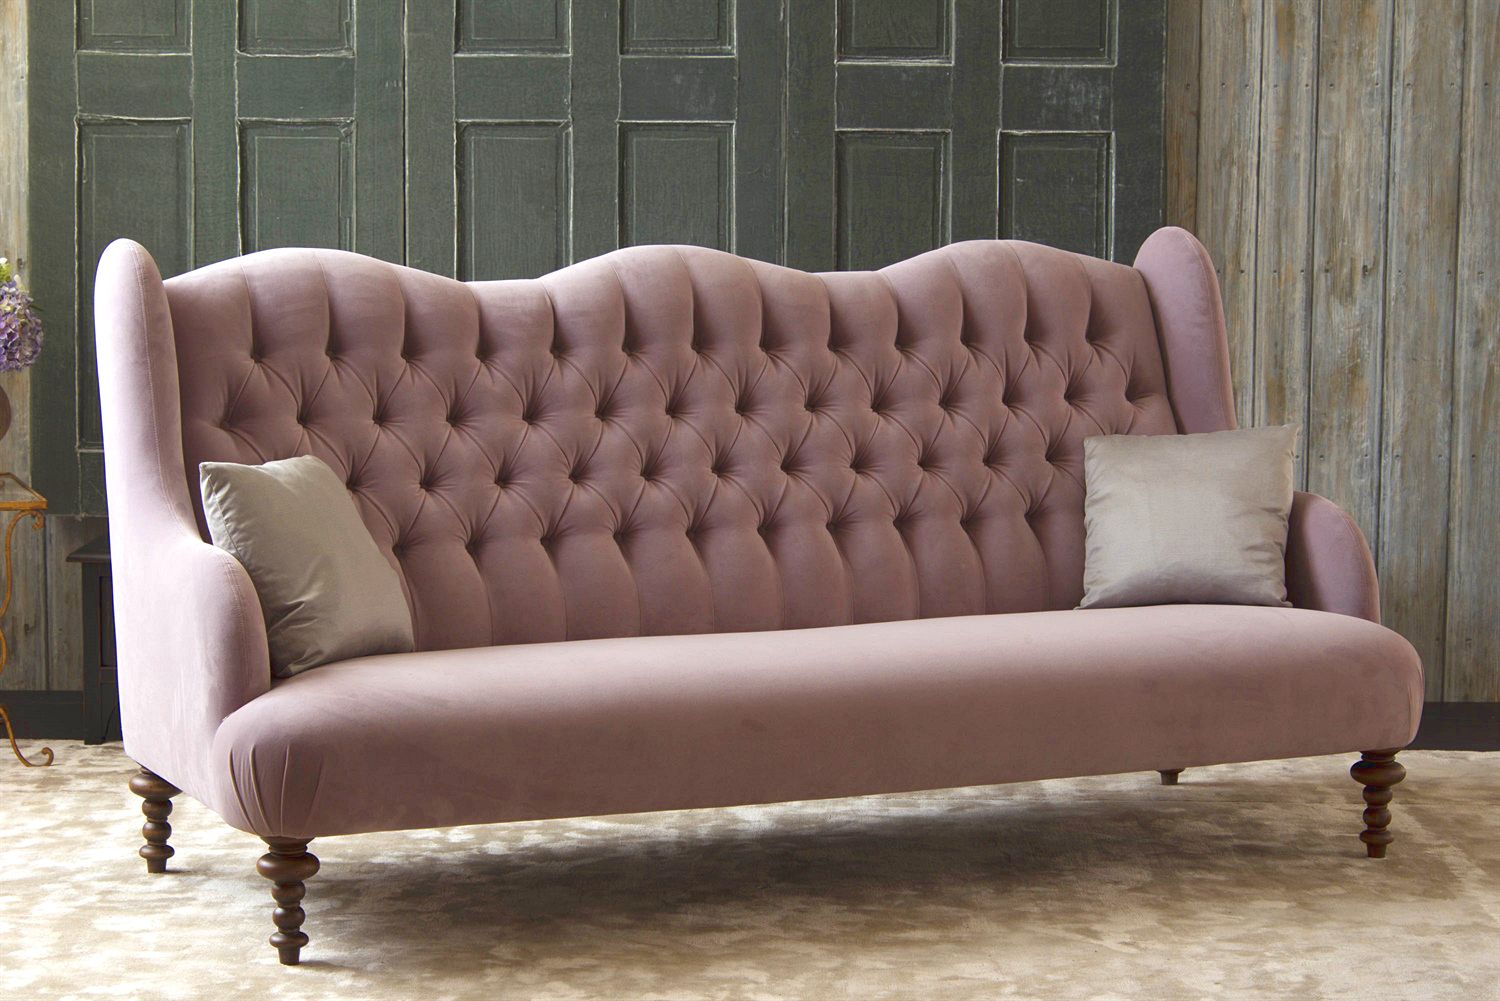 John Sankey Constantine Large Sofa | Kings Interiors Intended For Tate Arm Sofa Chairs (View 10 of 20)